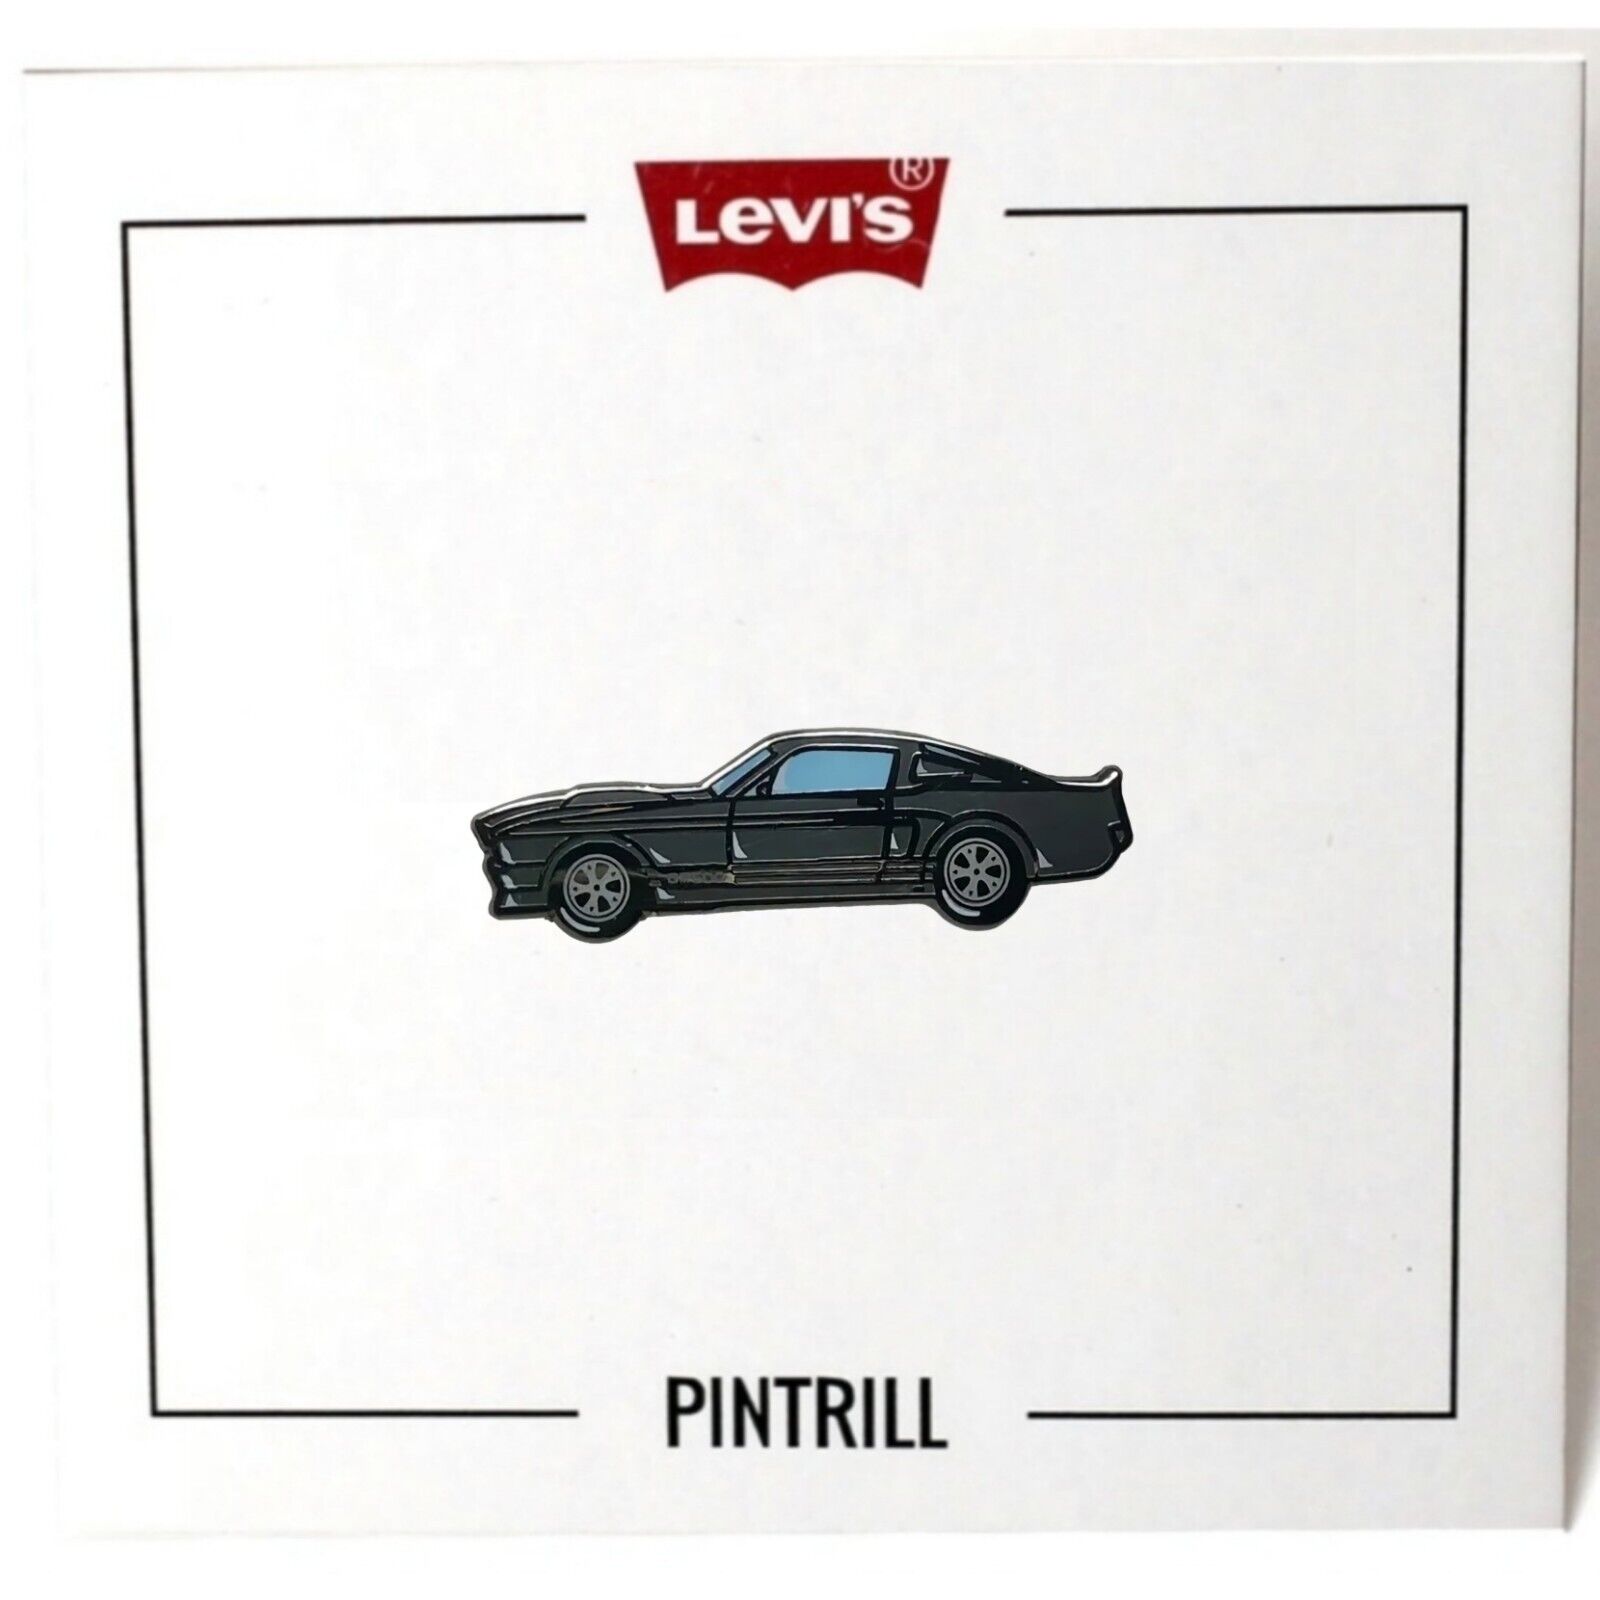 ⚡RARE⚡ PINTRILL x FORD x LEVI’S Black Ford Mustang Pin *BRAND NEW* LIMITED ED 🚗